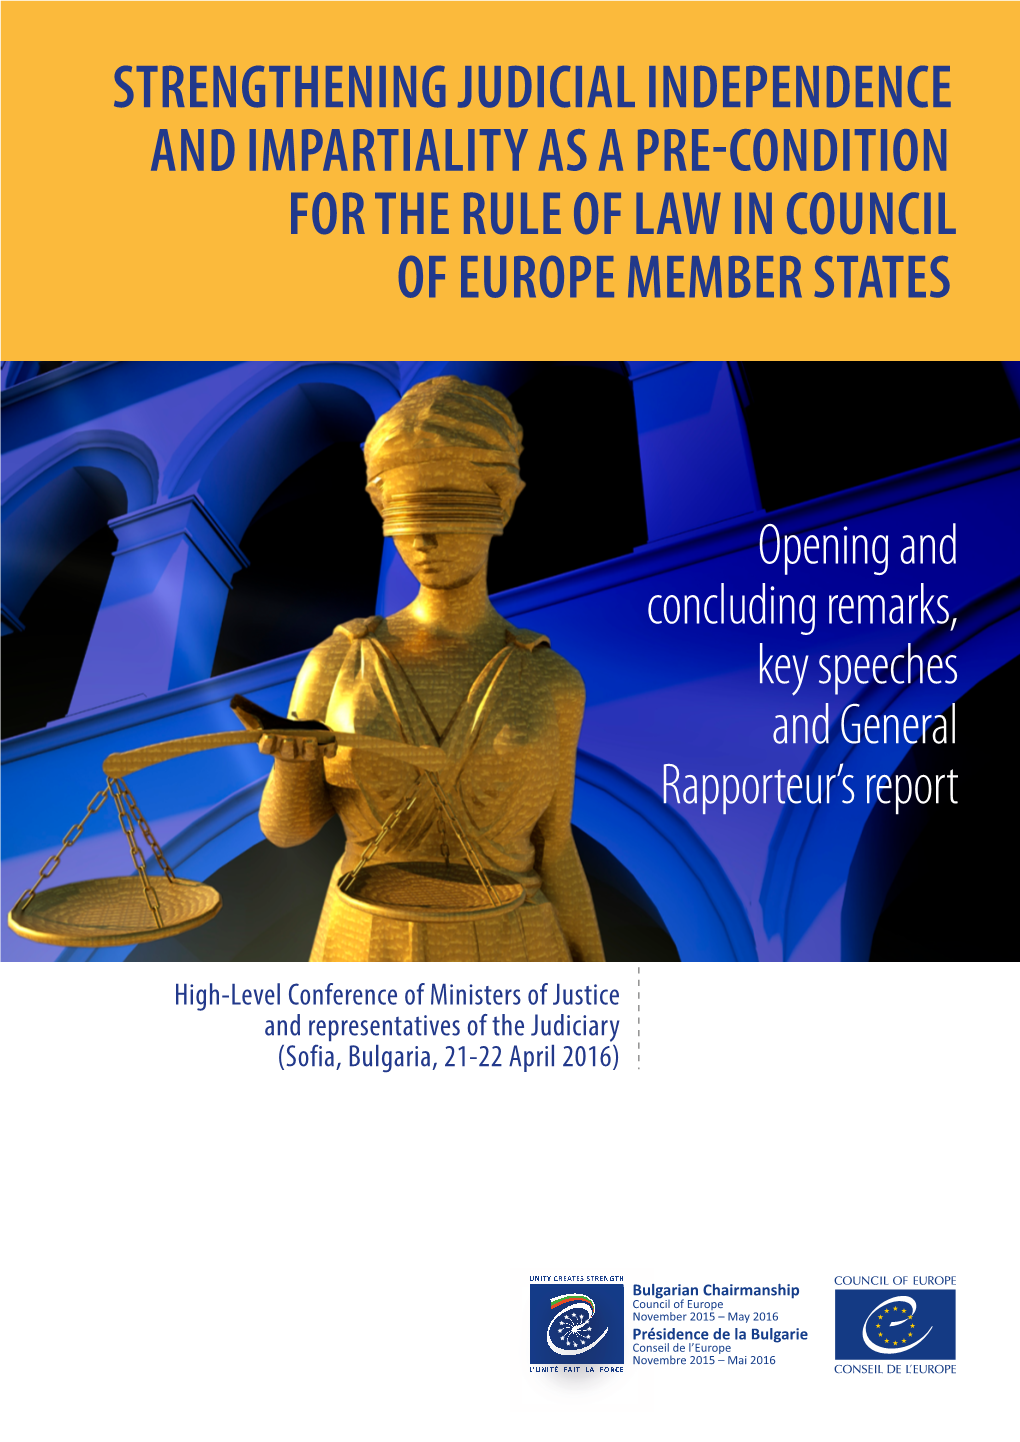 Strengthening Judicial Independence and Impartiality As a Pre-Condition for the Rule of Law in Council of Europe Member States